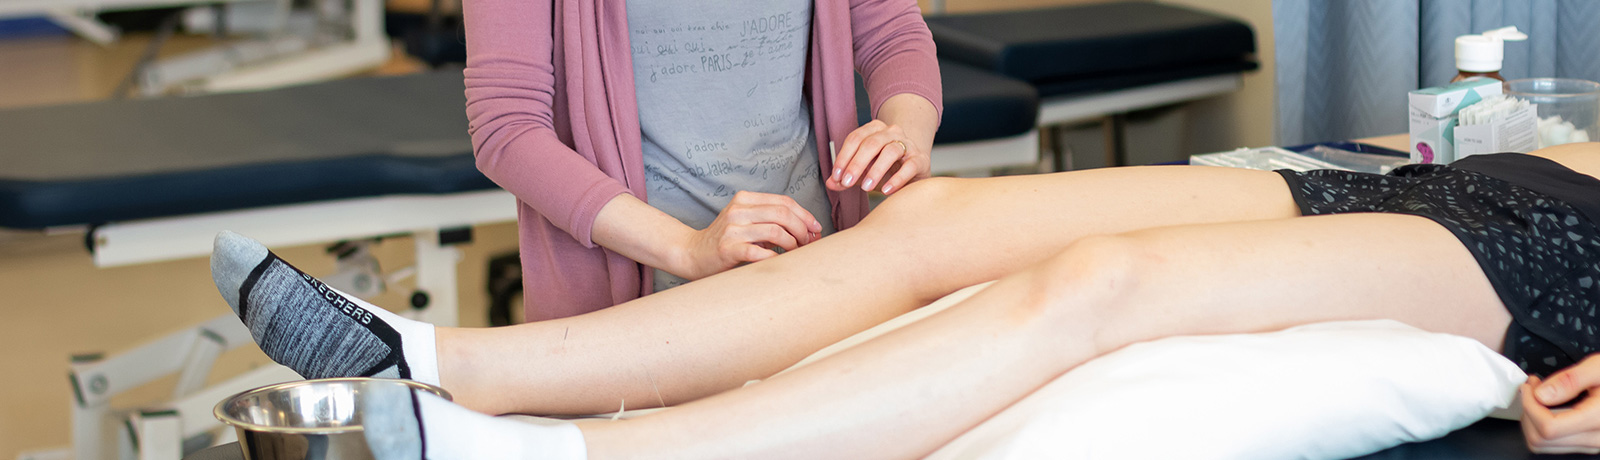 student doing acupuncture on leg